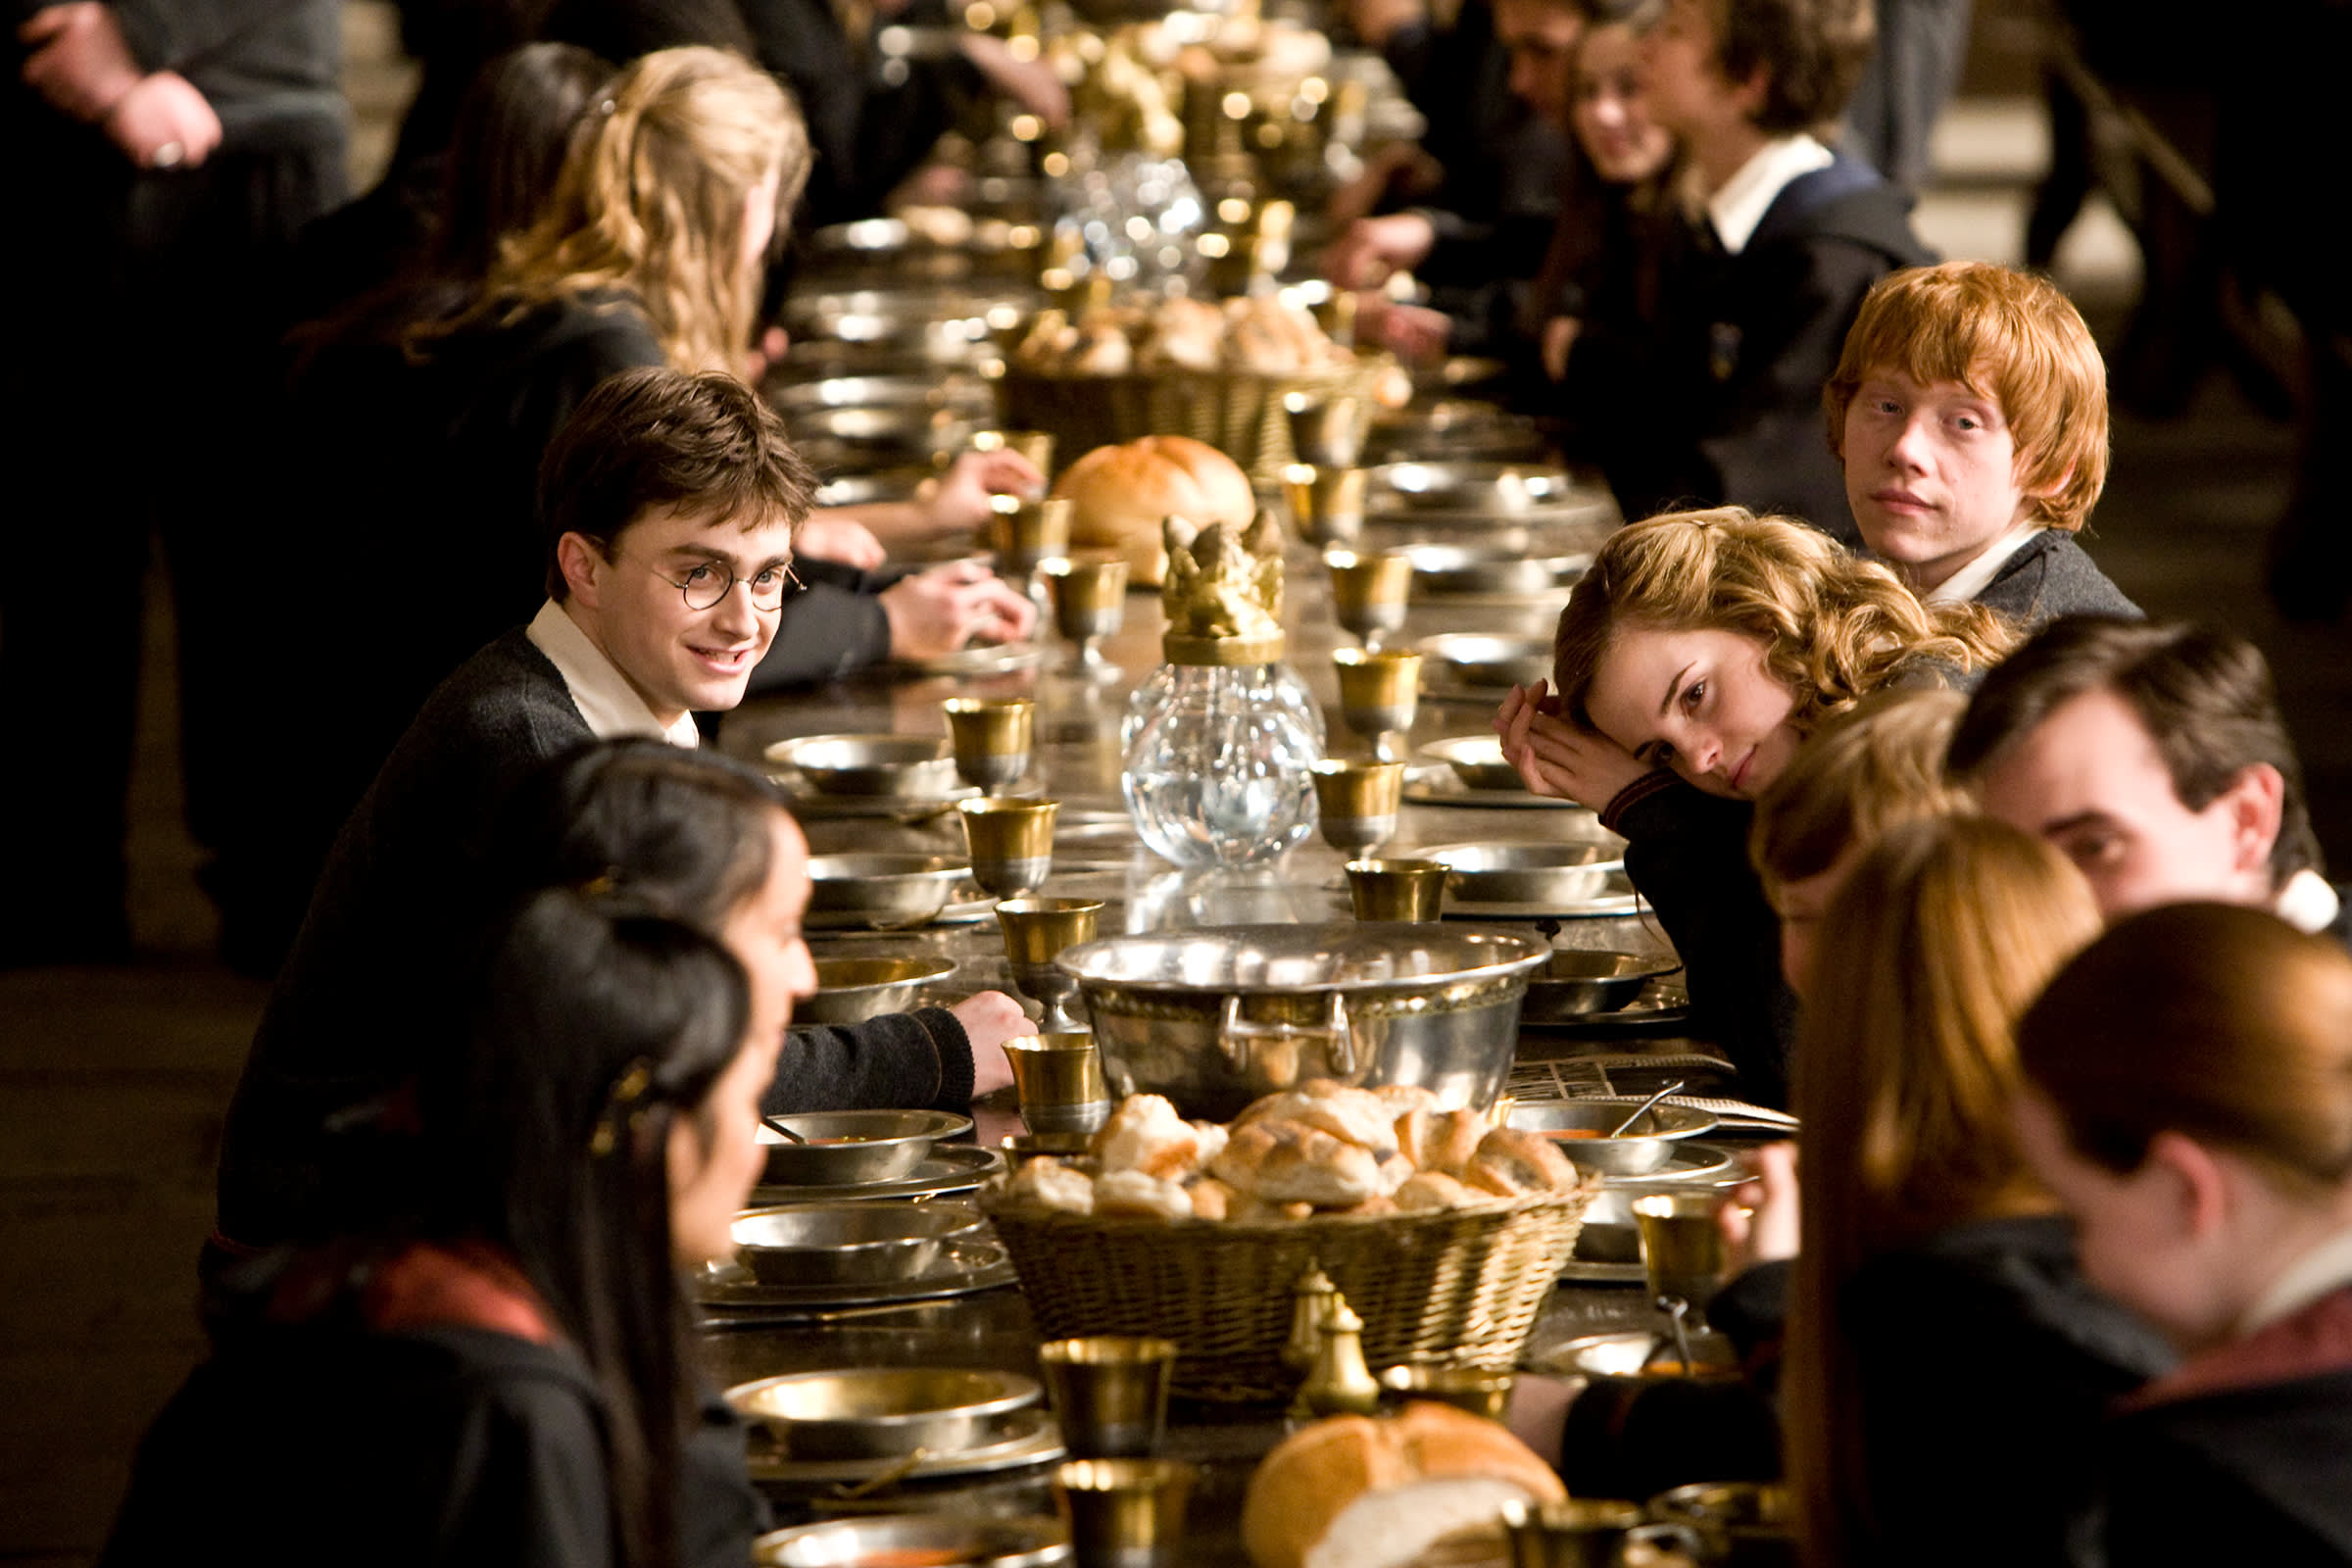 WB-HP-F6-half-blood-prince-harry-ron-hermione-at-dinner-great-hall.